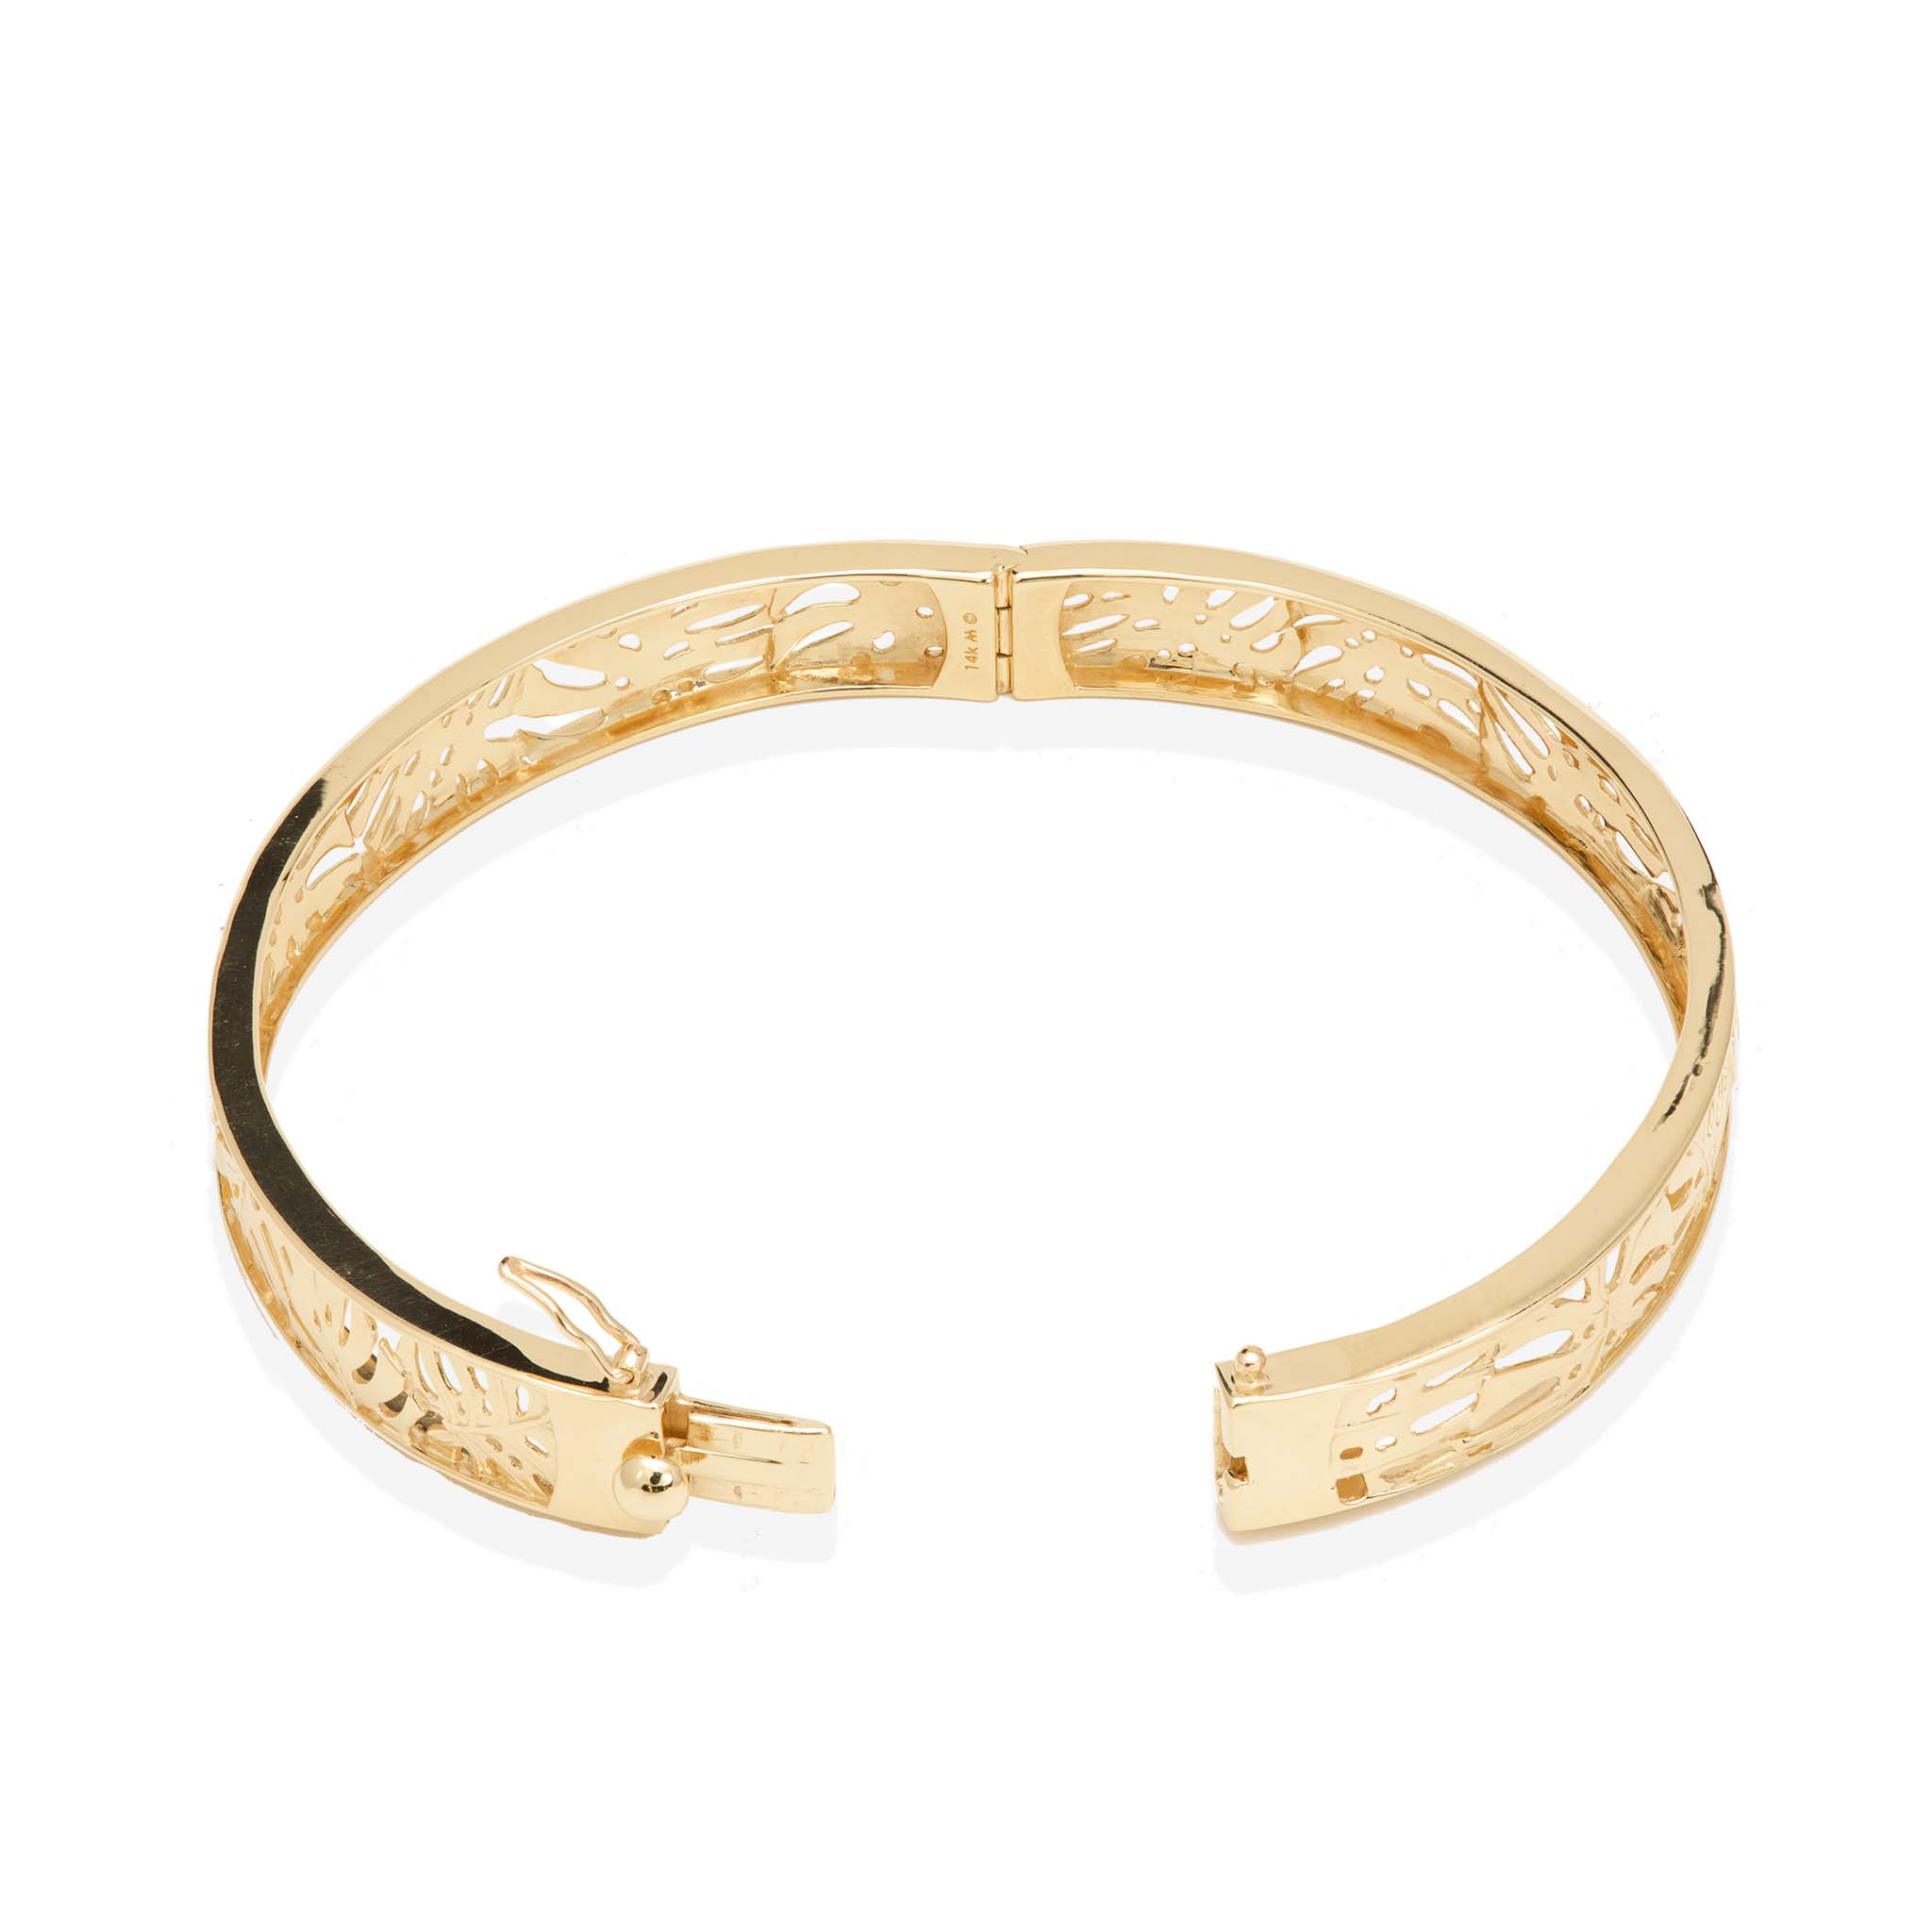 Monstera Bracelet in Gold - 8mm - Size 7.5" - Maui Divers Jewelry